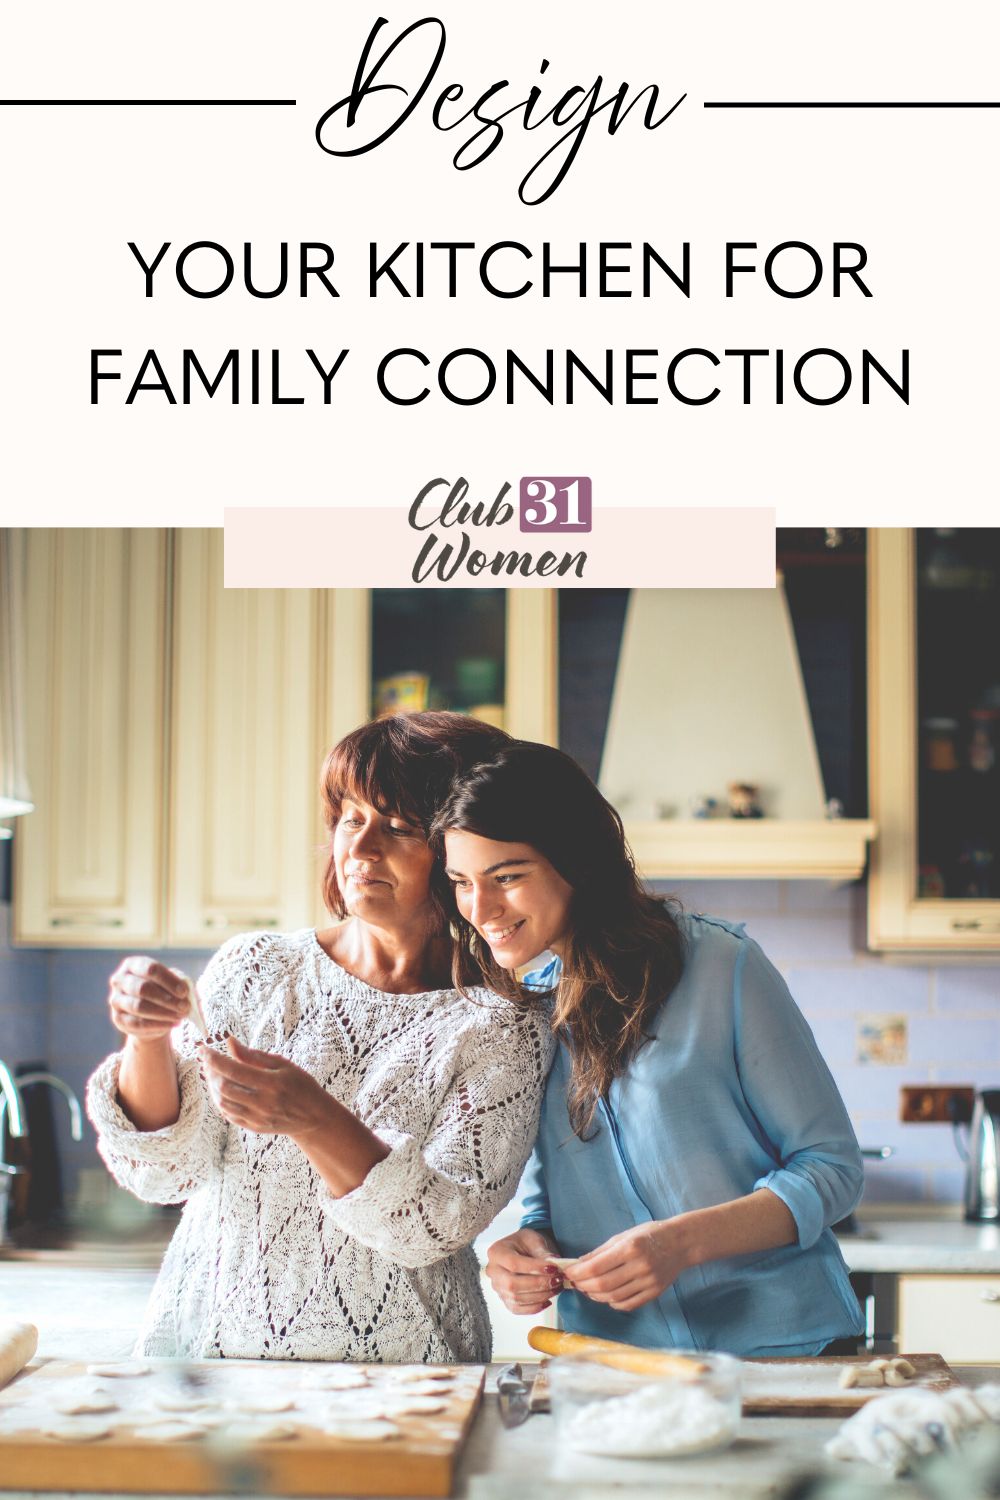 Having a family connection regularly is so pinnacle to the growth and nurturing of our children and teens. via @Club31Women